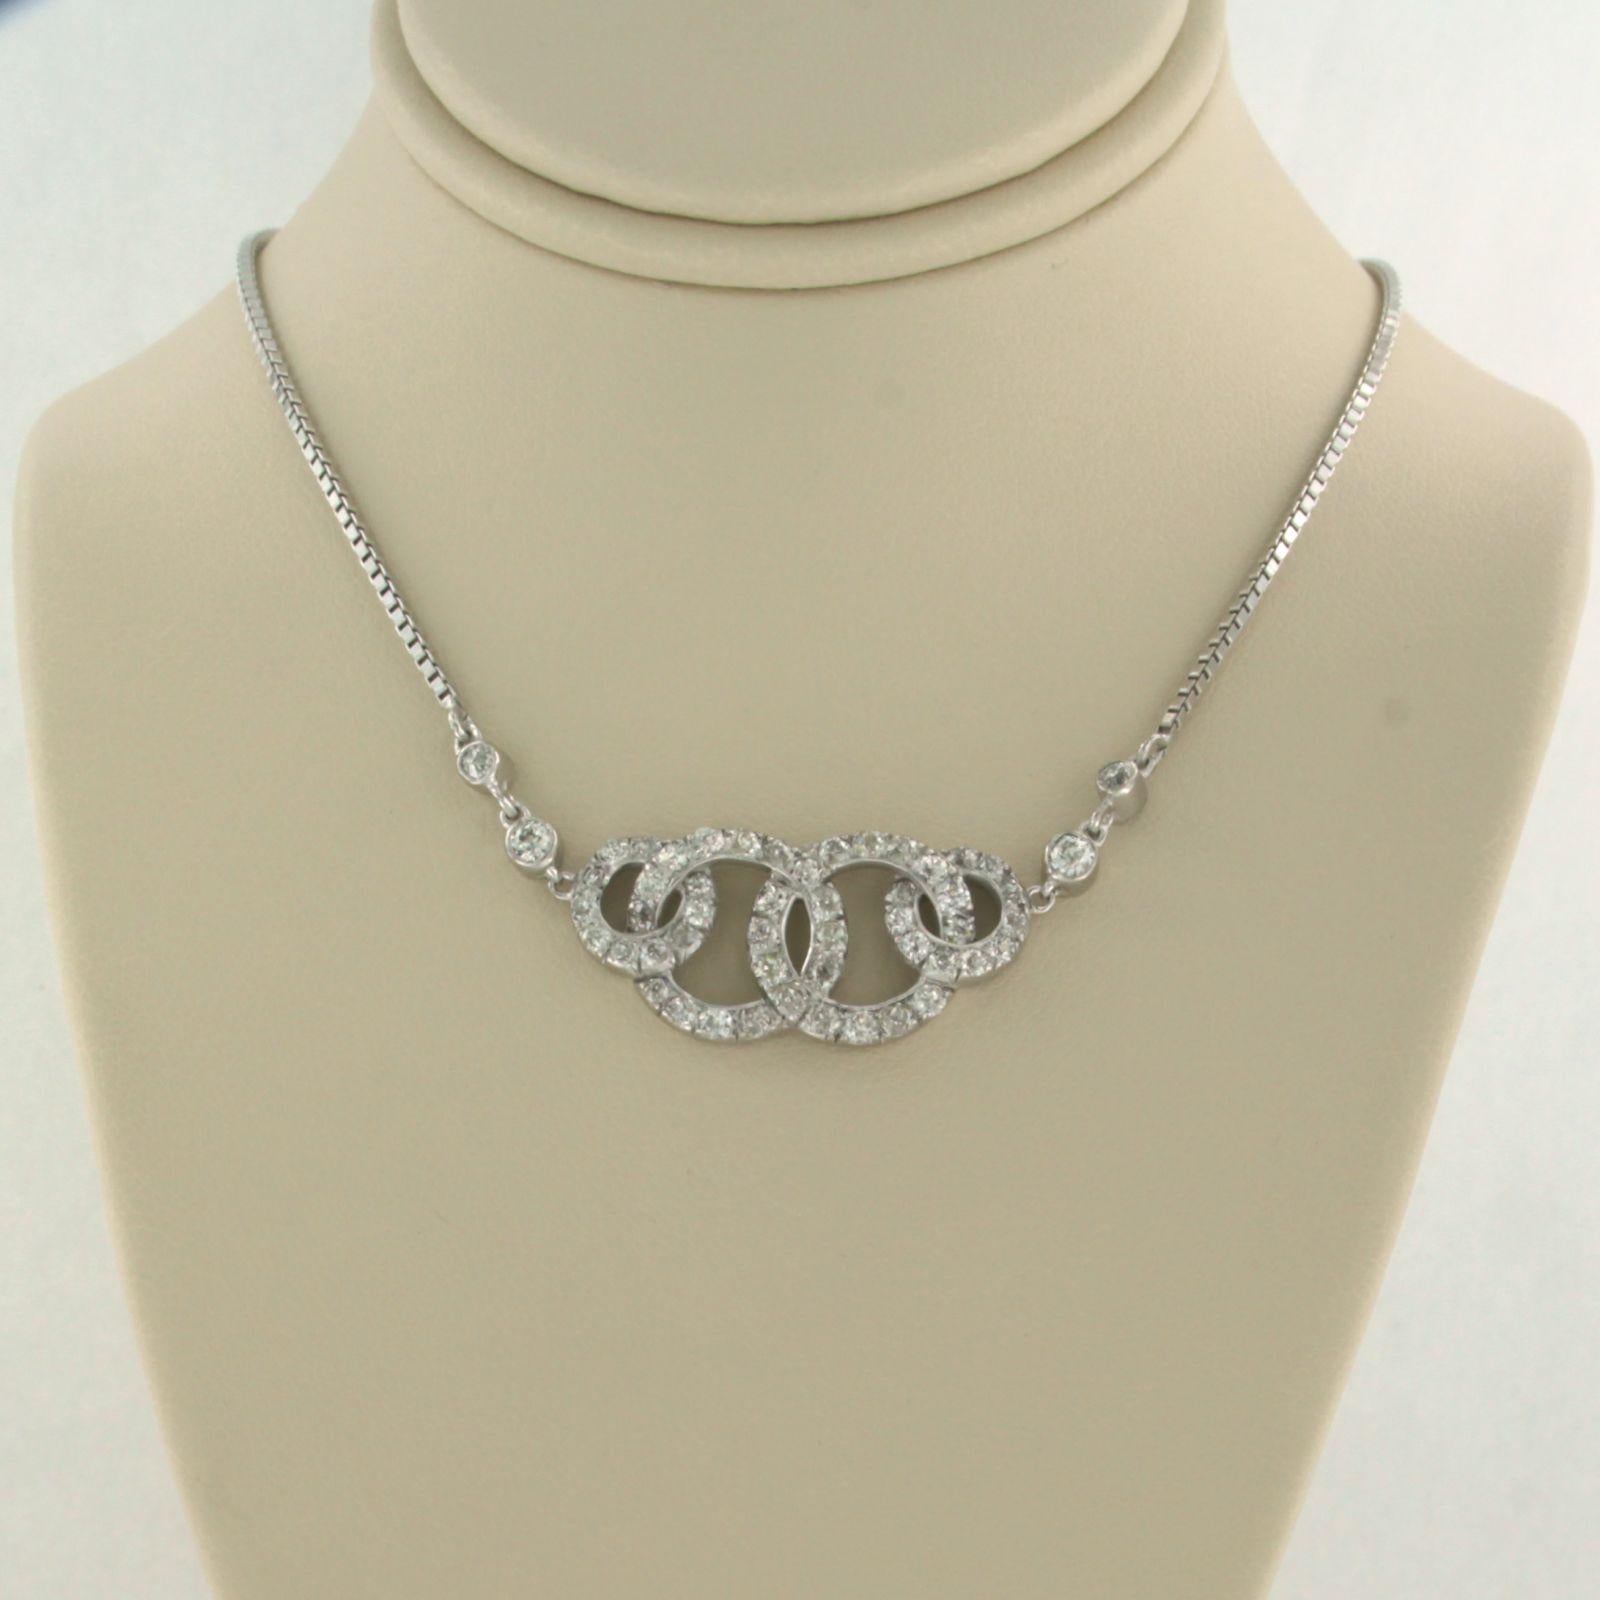 14k white gold necklace set with old mine cut diamonds up to . 2.00ct - F/G - VS/SI - 40 cm long

detailed description:

the length of the necklace is 40 cm long by 1.2 mm wide

the size of the center piece of the necklace is 4.7 cm wide by 1.3 cm